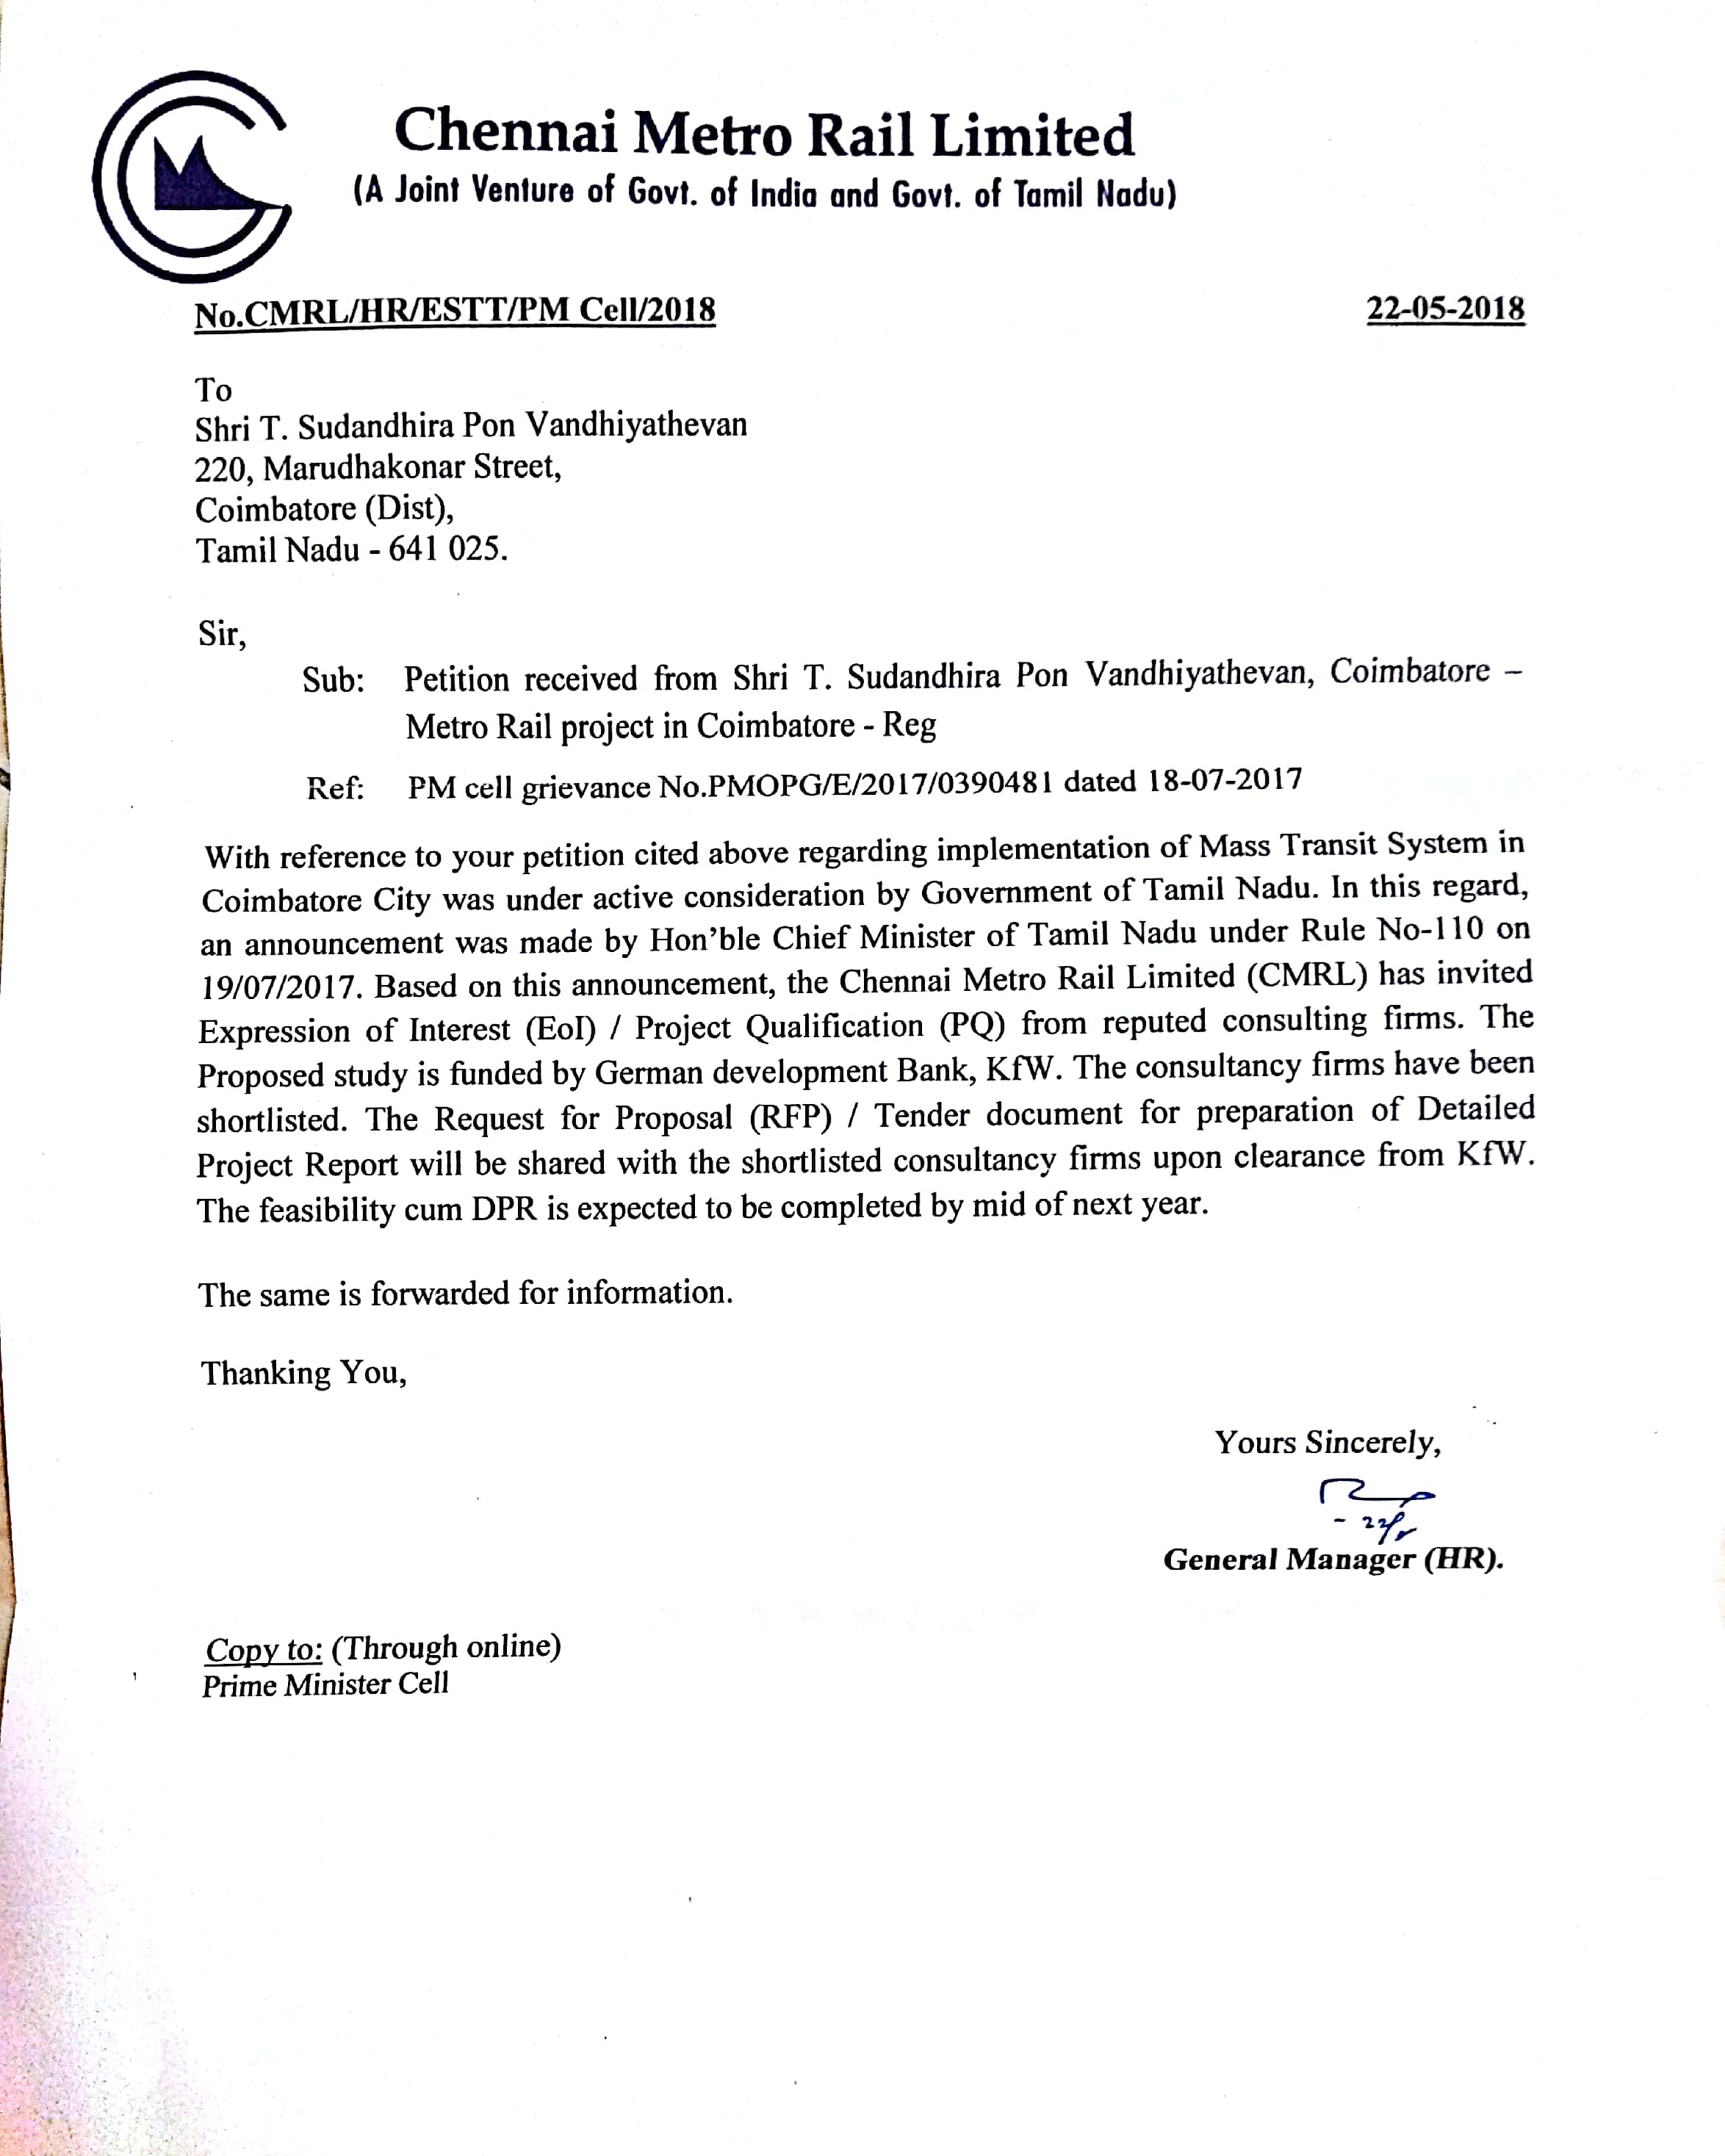 Reply received from Chennai Metro Rail Ltd against a Petition